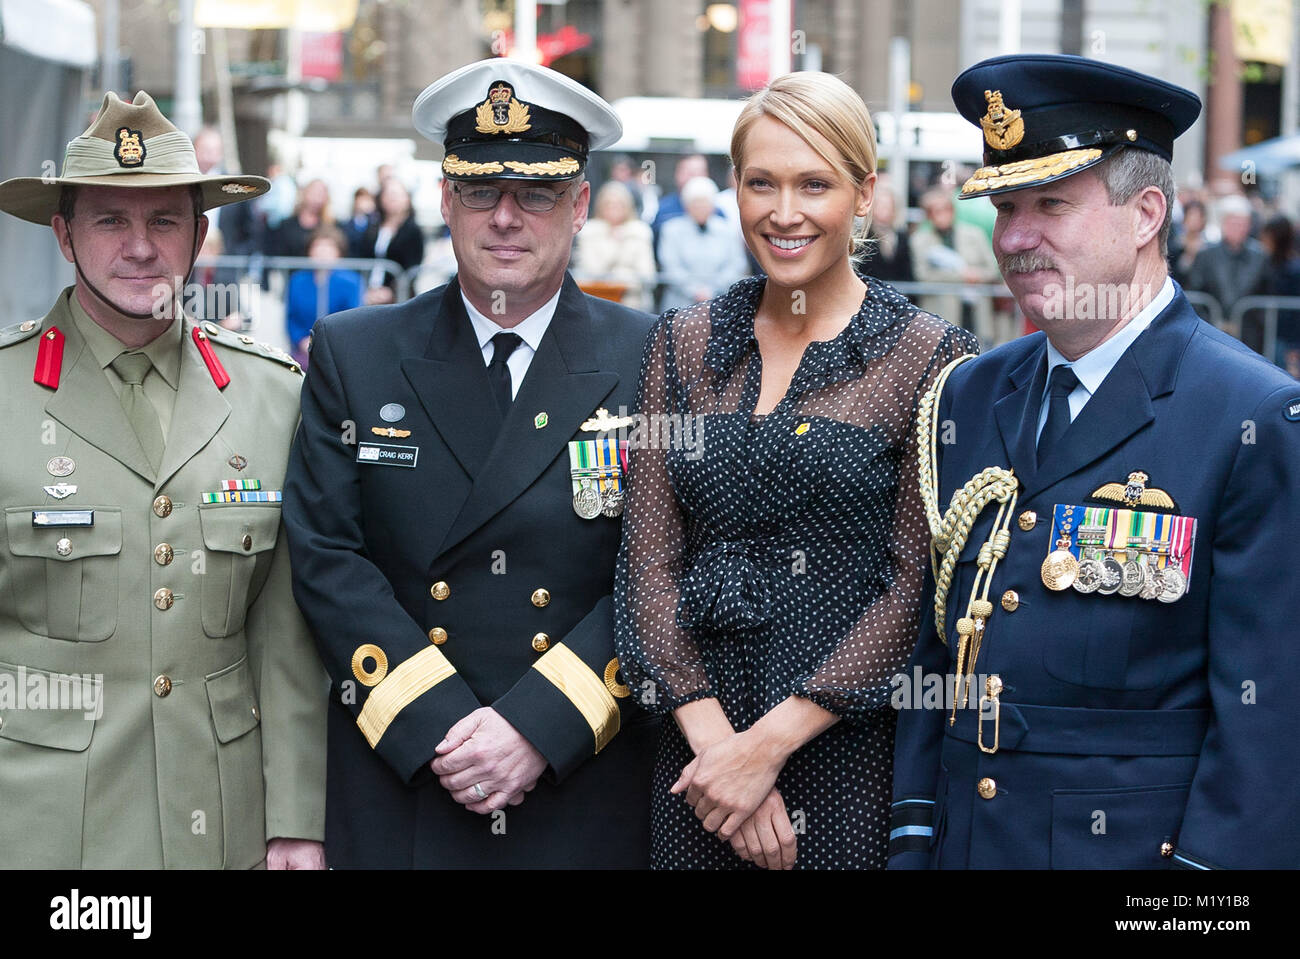 Legacy Week is launched at Martin Place in Sydney Australia for 2006. The popular annual event is well-known throughout Australia for the badge sellers who collect funds from the public to assist Australia's returned services staff and their relatives. Pictured: Erika Heynatz with senior members of the ADF (Australian Defence Force). Stock Photo